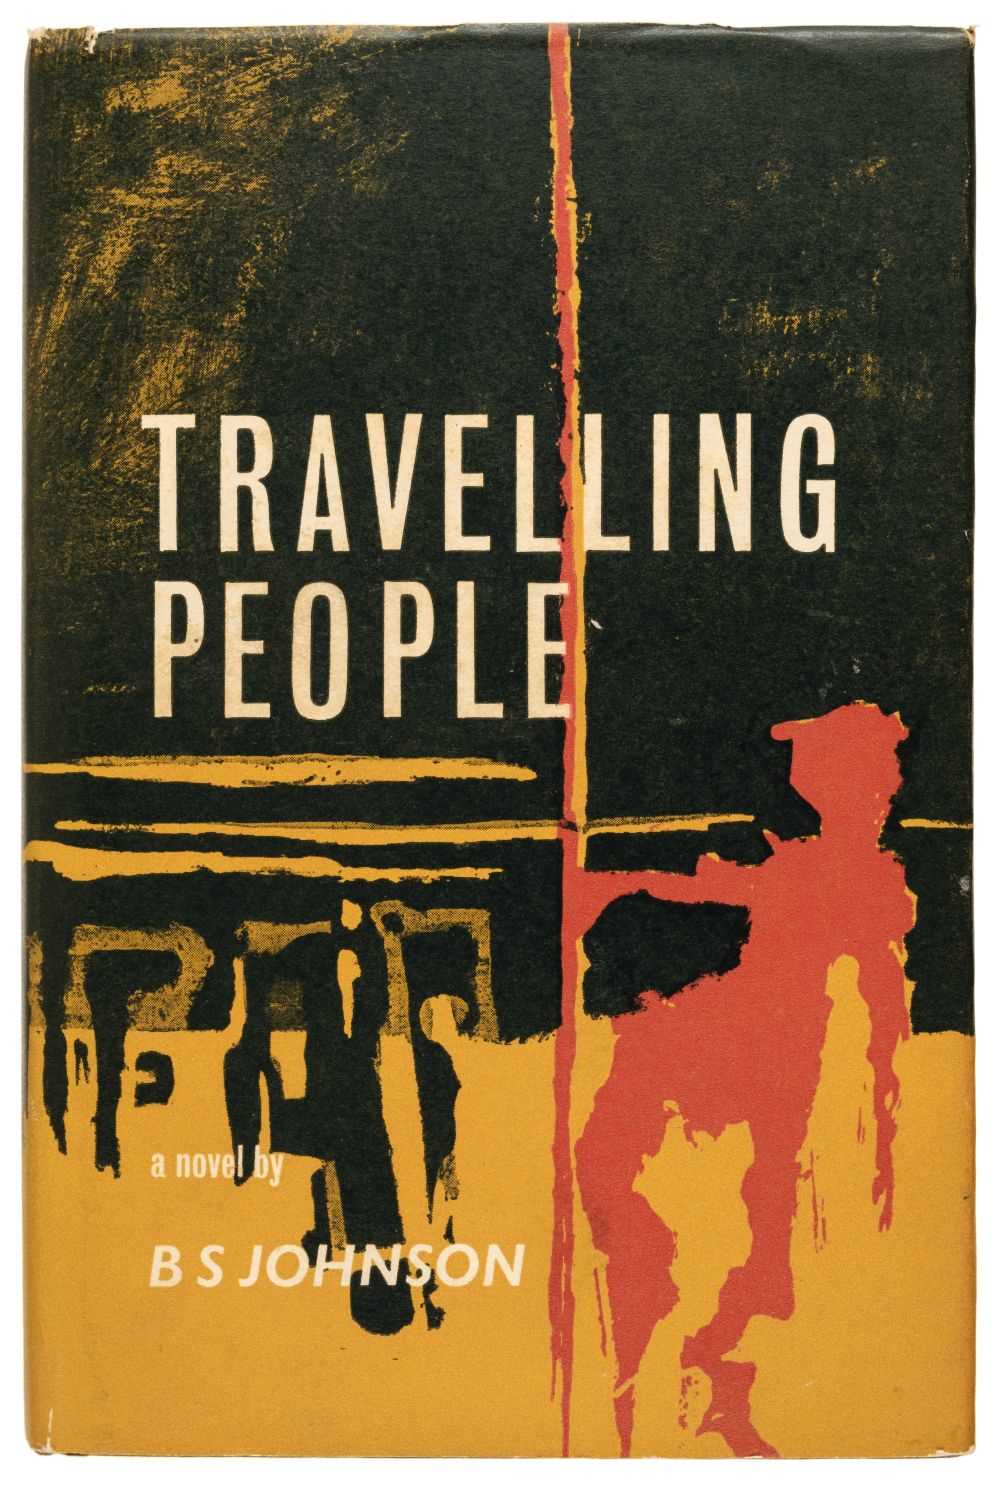 Lot 848 - Johnson (B.S.) Travelling People, 1st edition, 1963